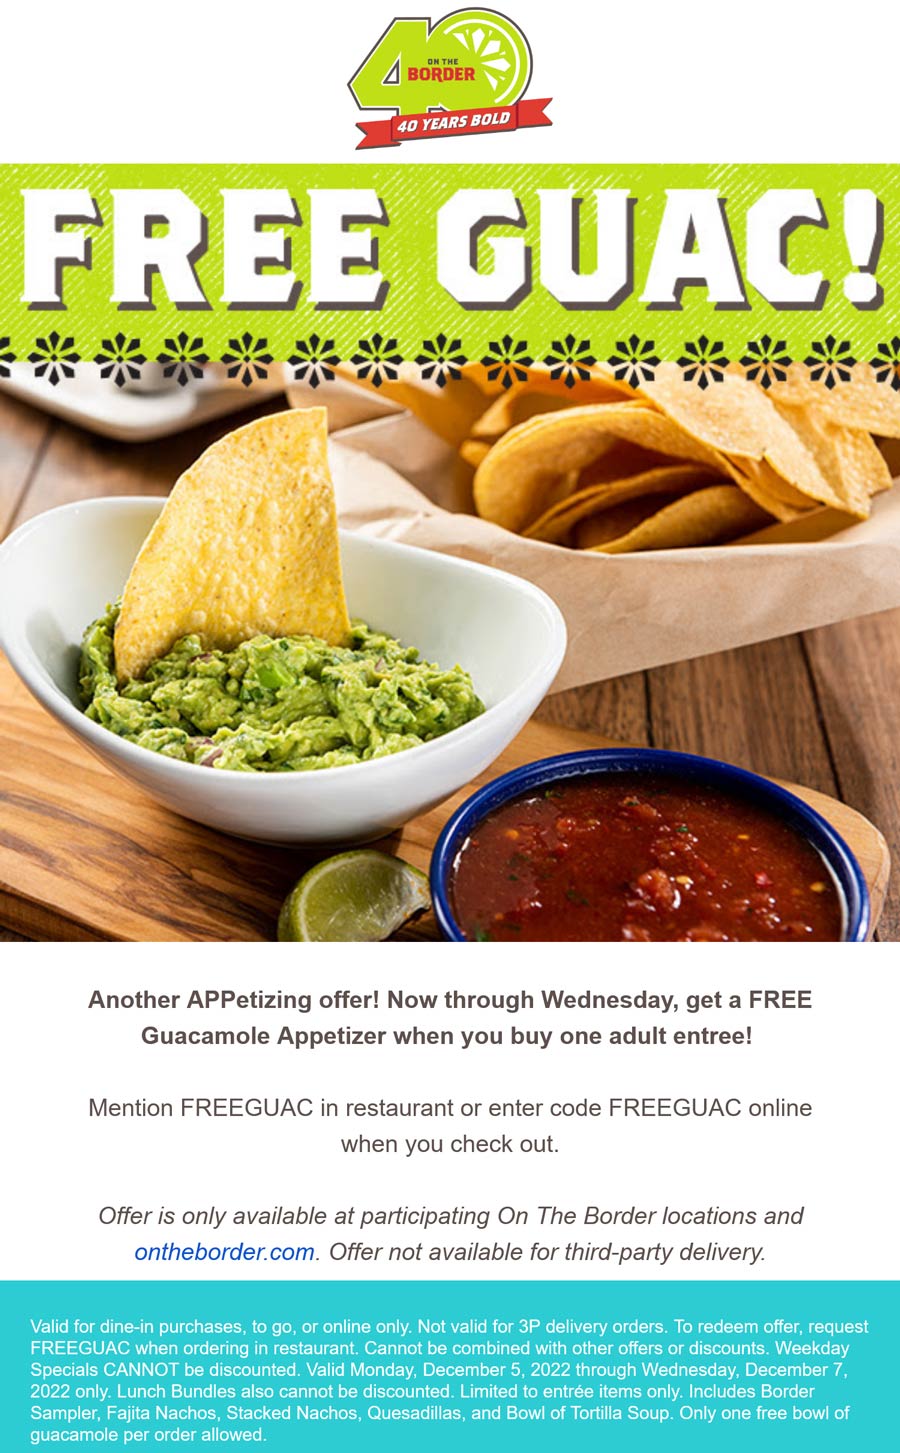 On The Border restaurants Coupon  Free guacamole appetizer with your entree at On The Border via promo code FREEGUAC #ontheborder 